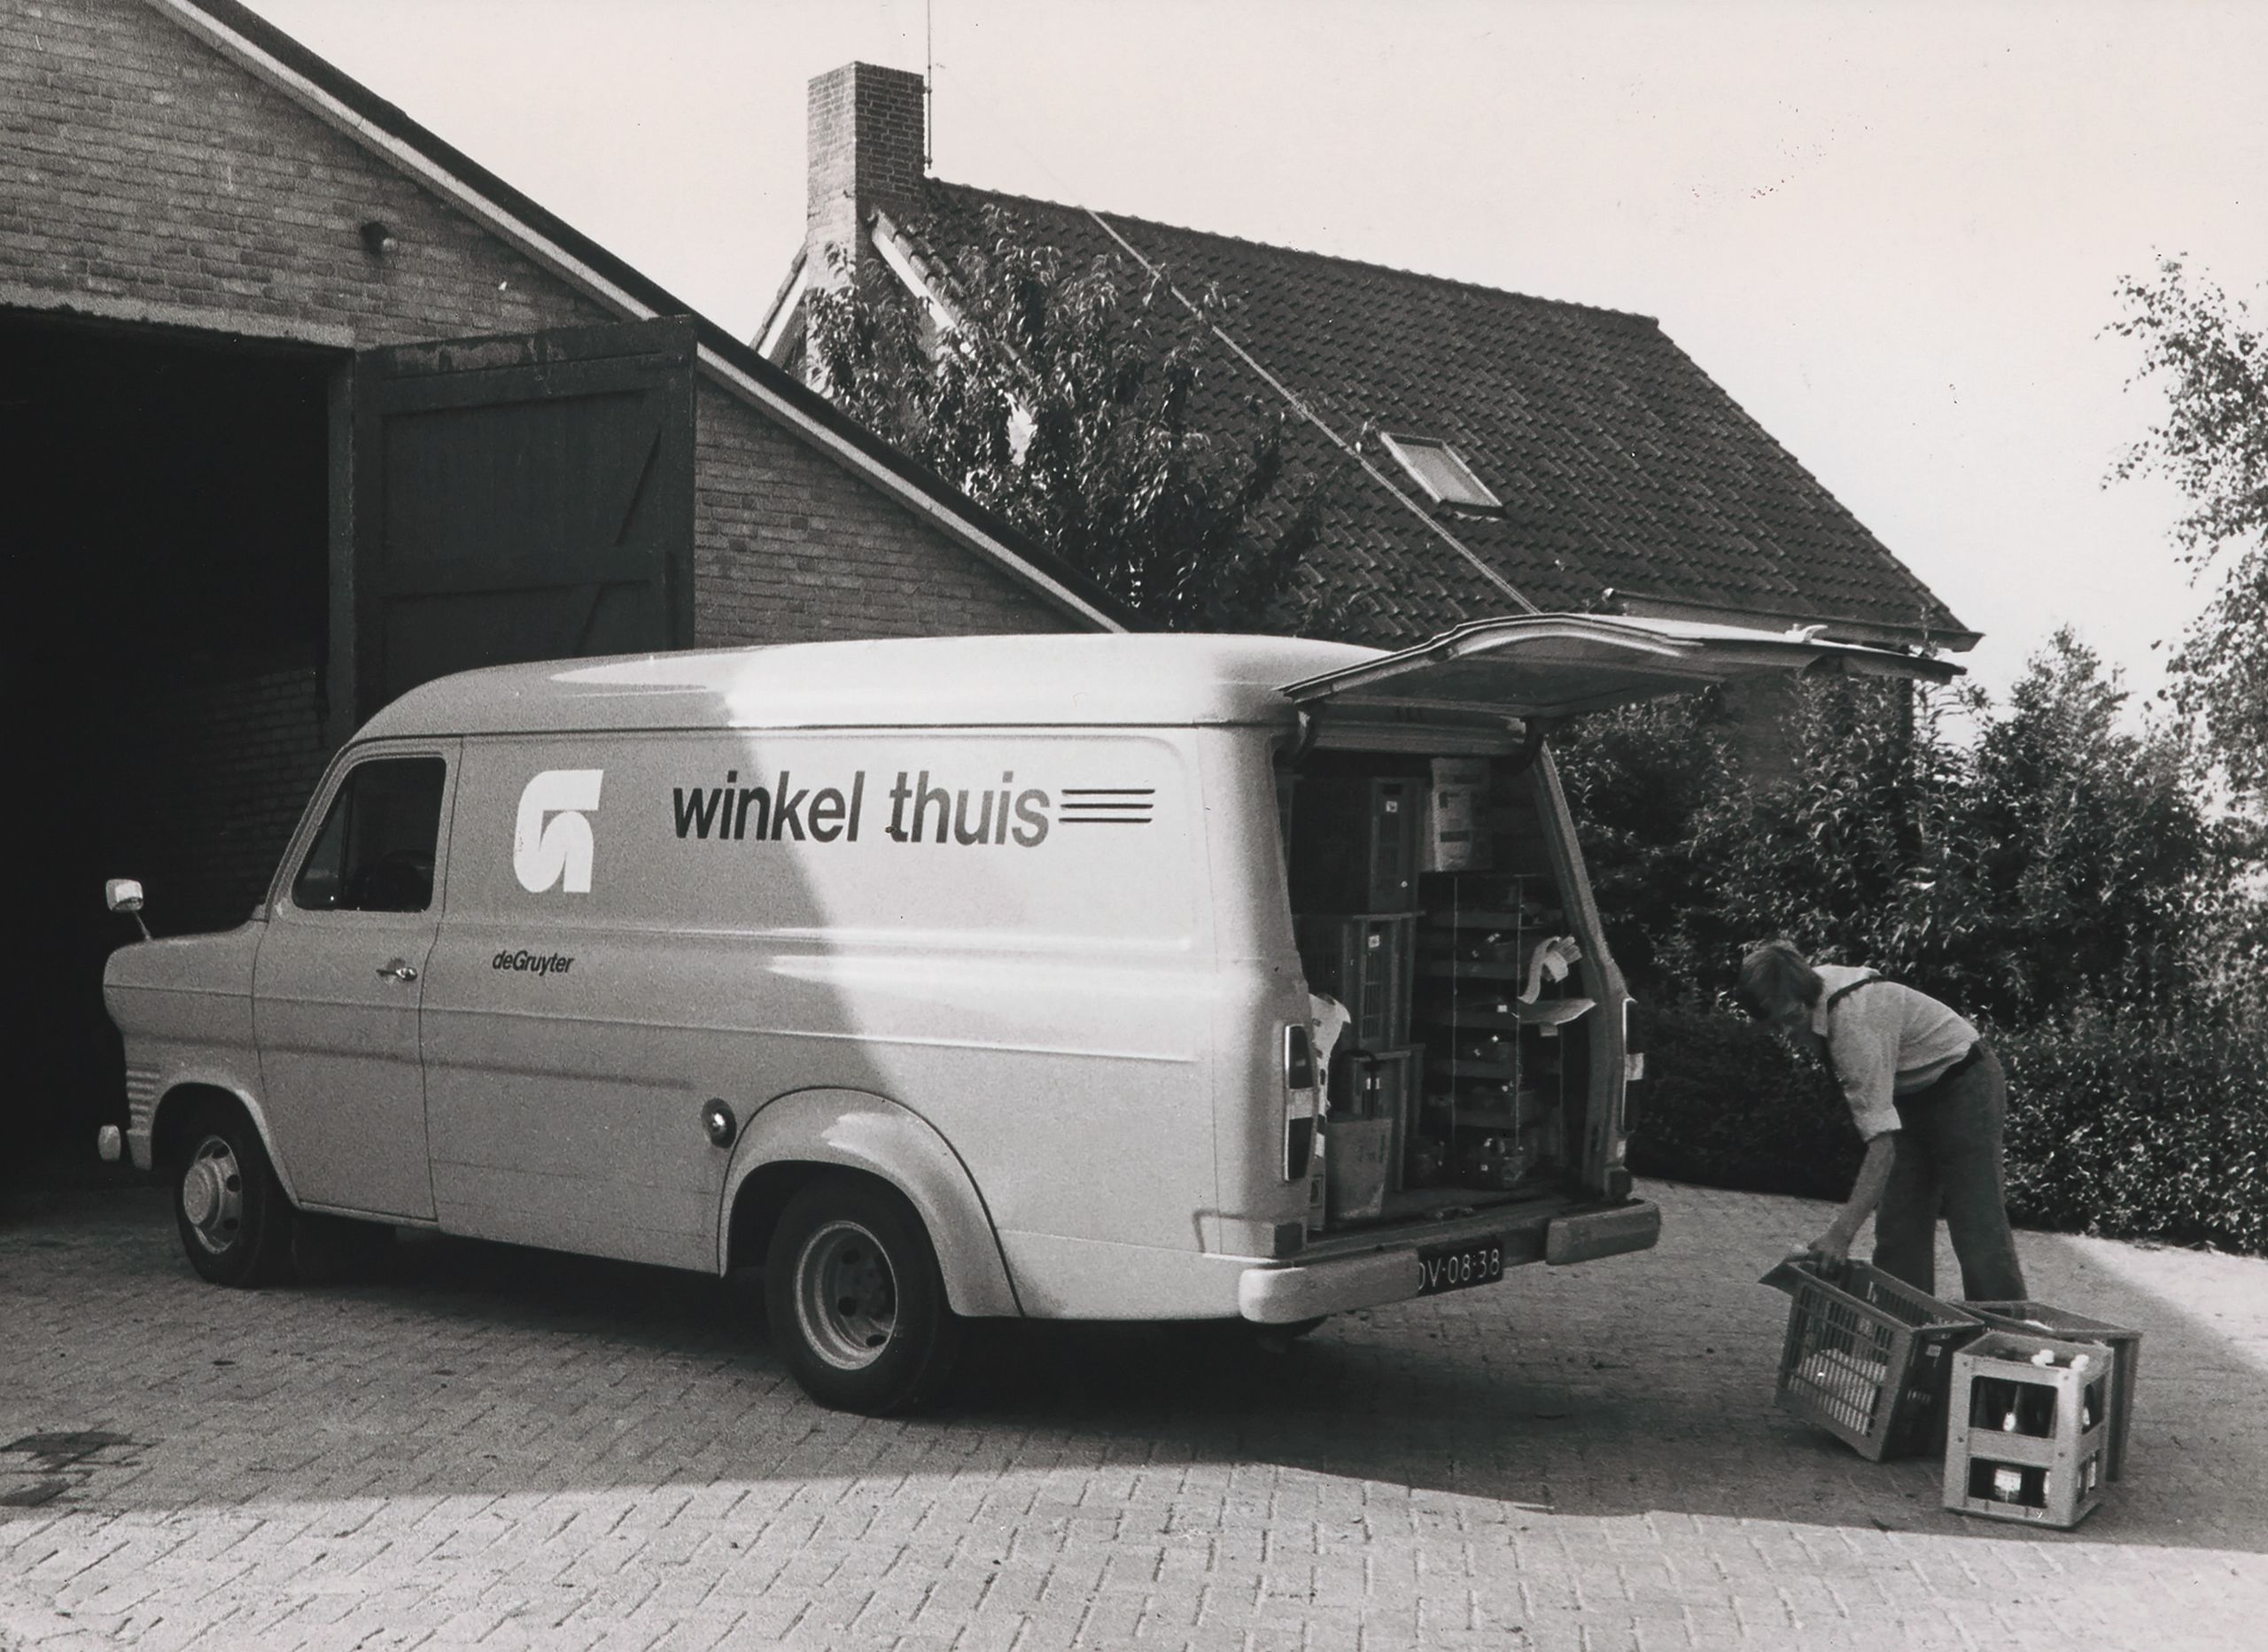 Supermarket subsidiary deGruyter delivers groceries to a home, c. 1973.